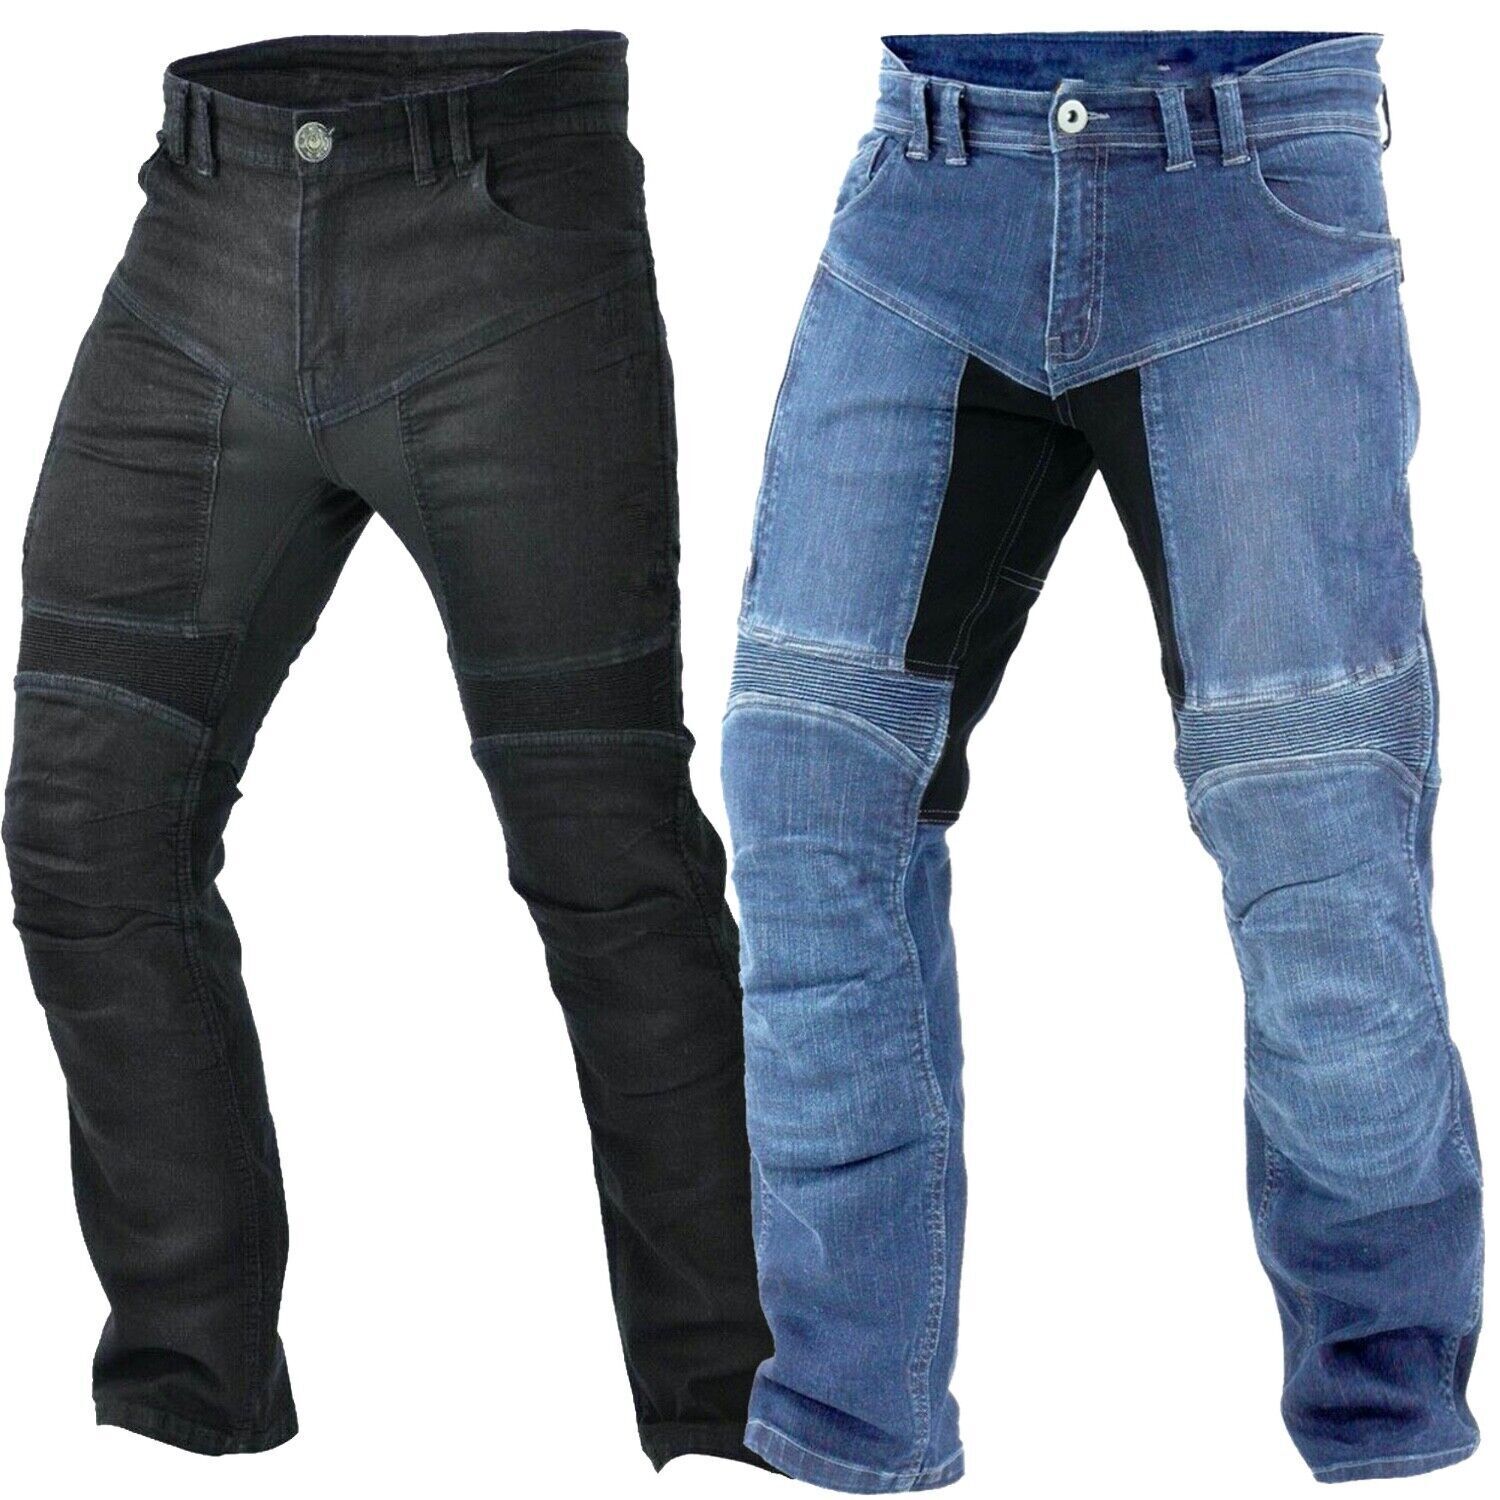 Mens Motorcycle Pants Motorbike Stretch Panel Aramid Protection Lining Trousers